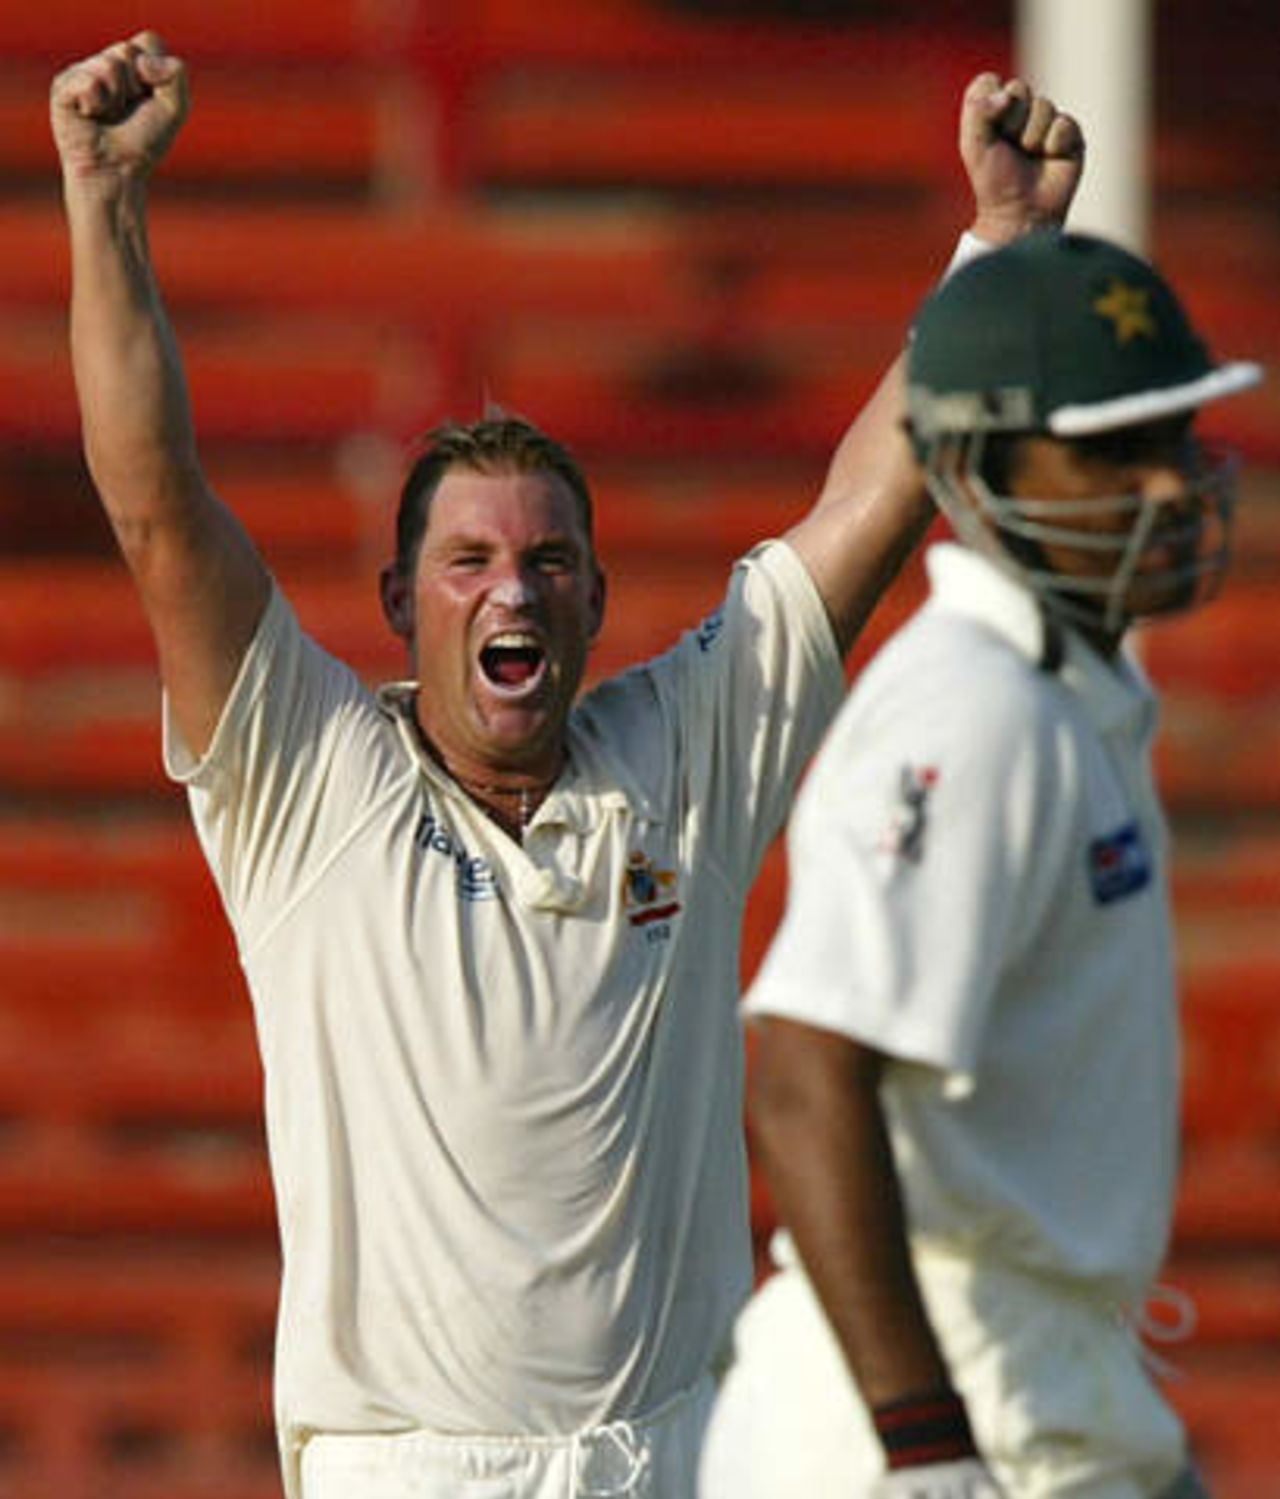 Australian spin bowler Shane Warne celebrates winning his team's second cricket test match after final batsman and Pakistan captain Waqar Younis (L) is dismissed LBW at Sharjah's stadium October 12, 2002. Pakistan crumbled to defeat in less than two days of the second test against Australia on Saturday, adding just 53 to their first innings 59 and losing by an innings and 198 runs.